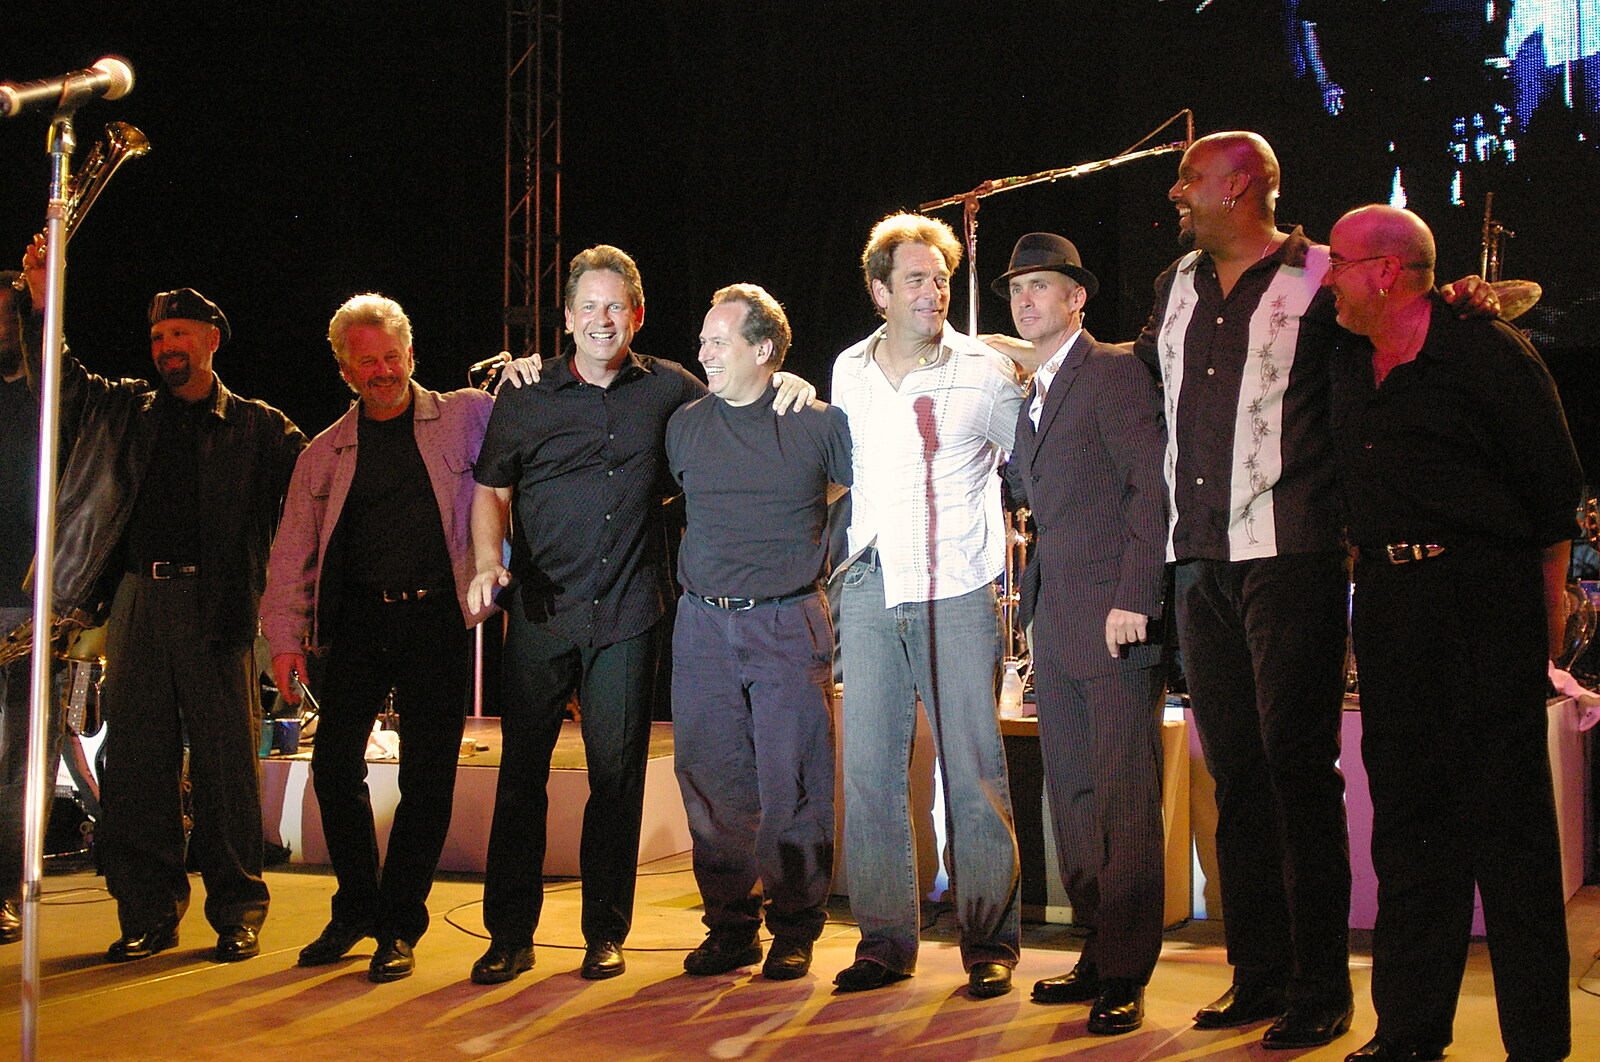 Huey Lewis and band take a bow from BREW Fest and Huey Lewis and the News, Balboa Park, San Diego, California - 2nd June 2005